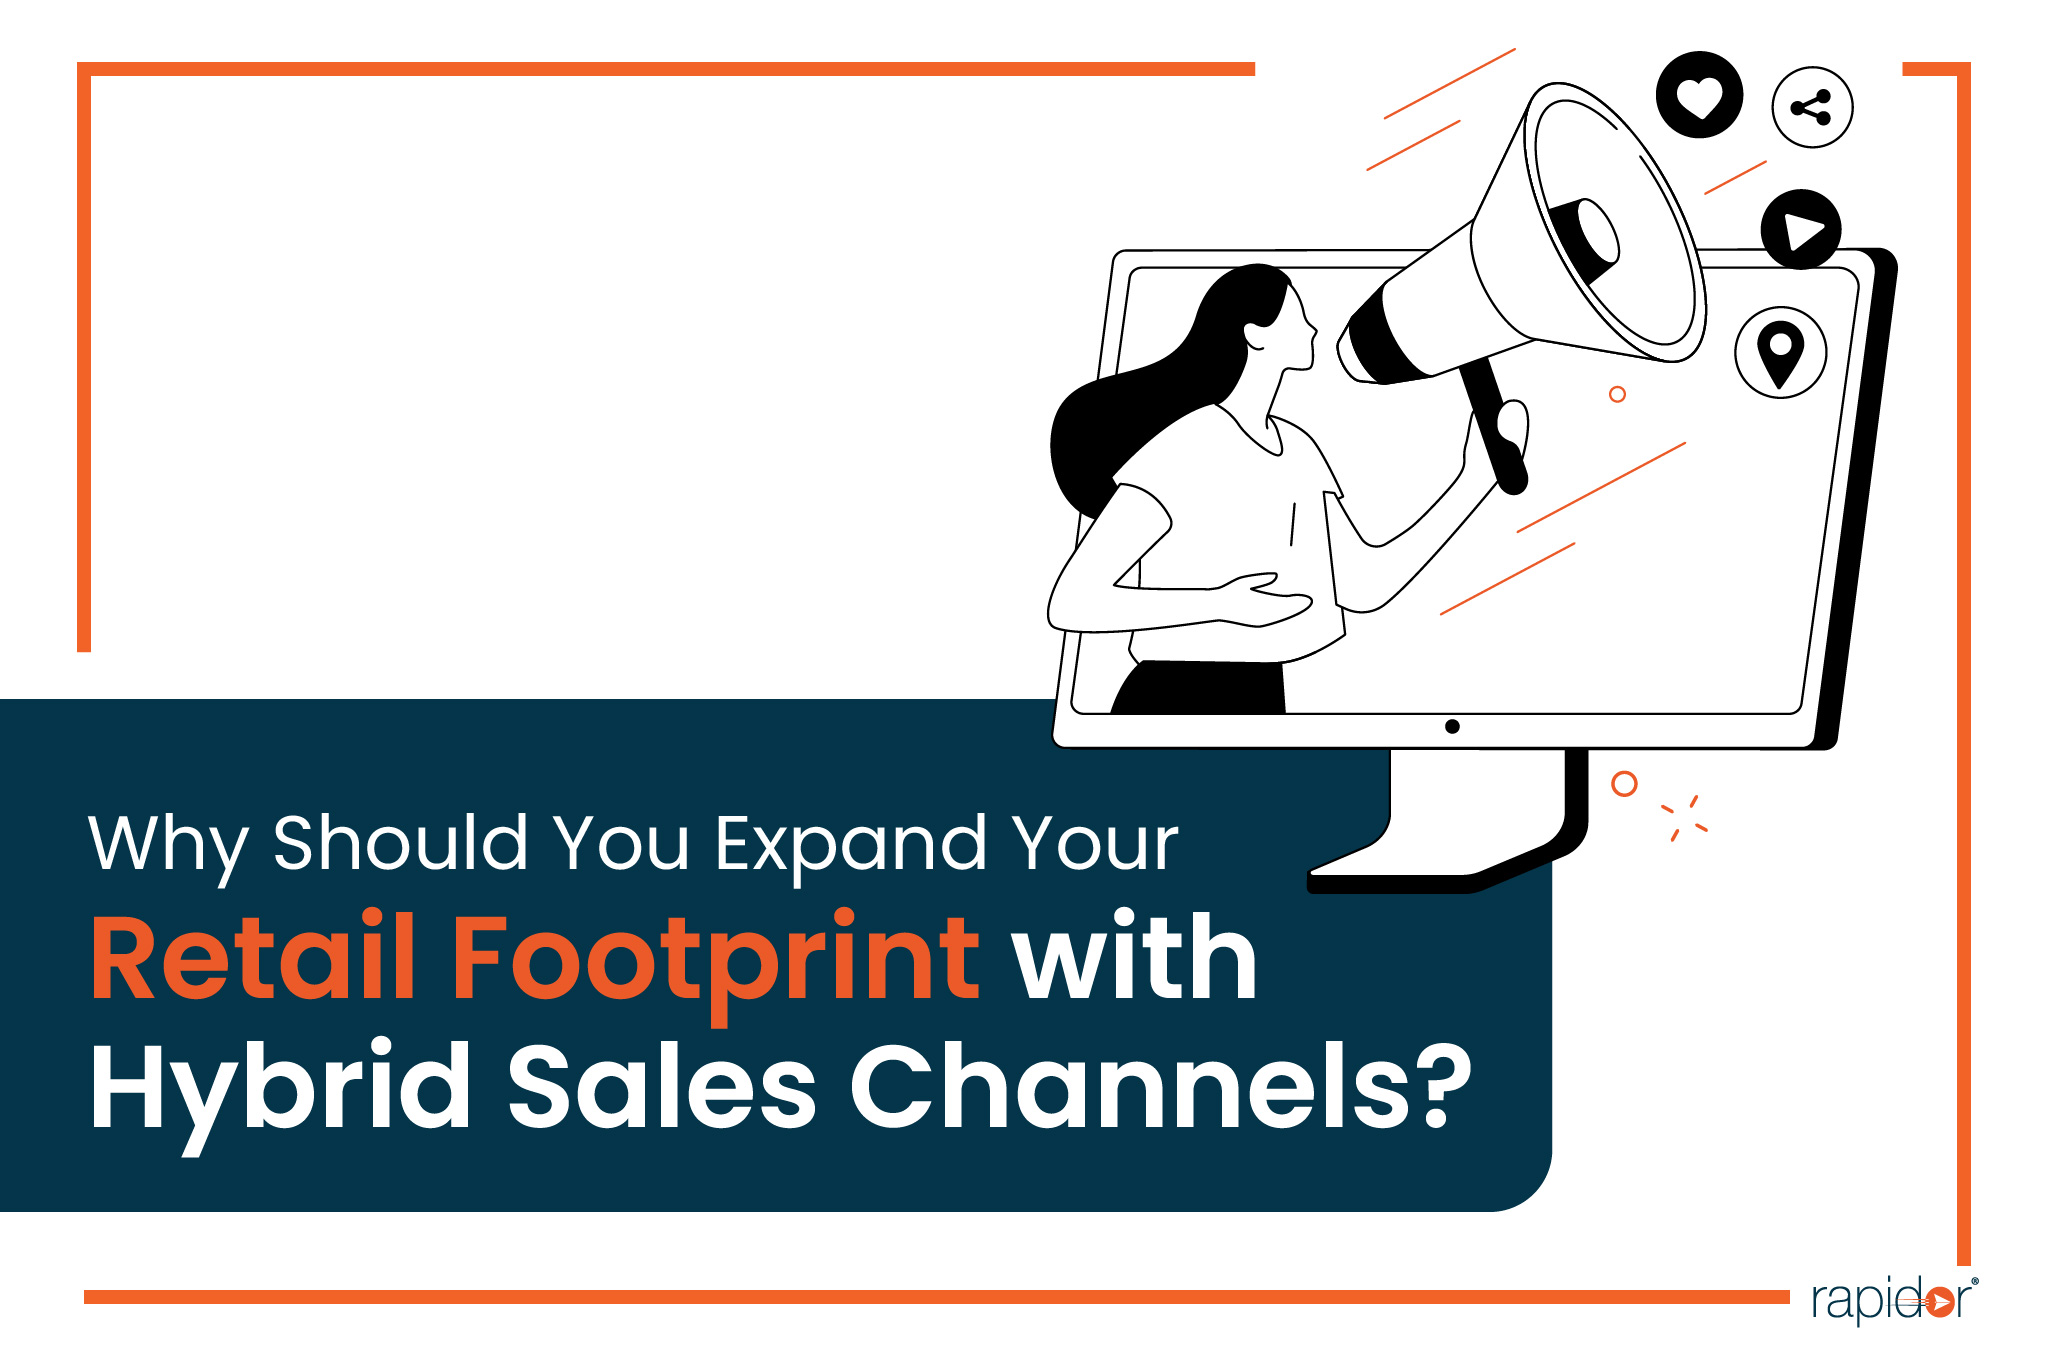 Why Should You Expand Your Retail Footprint with Hybrid Sales Channels?